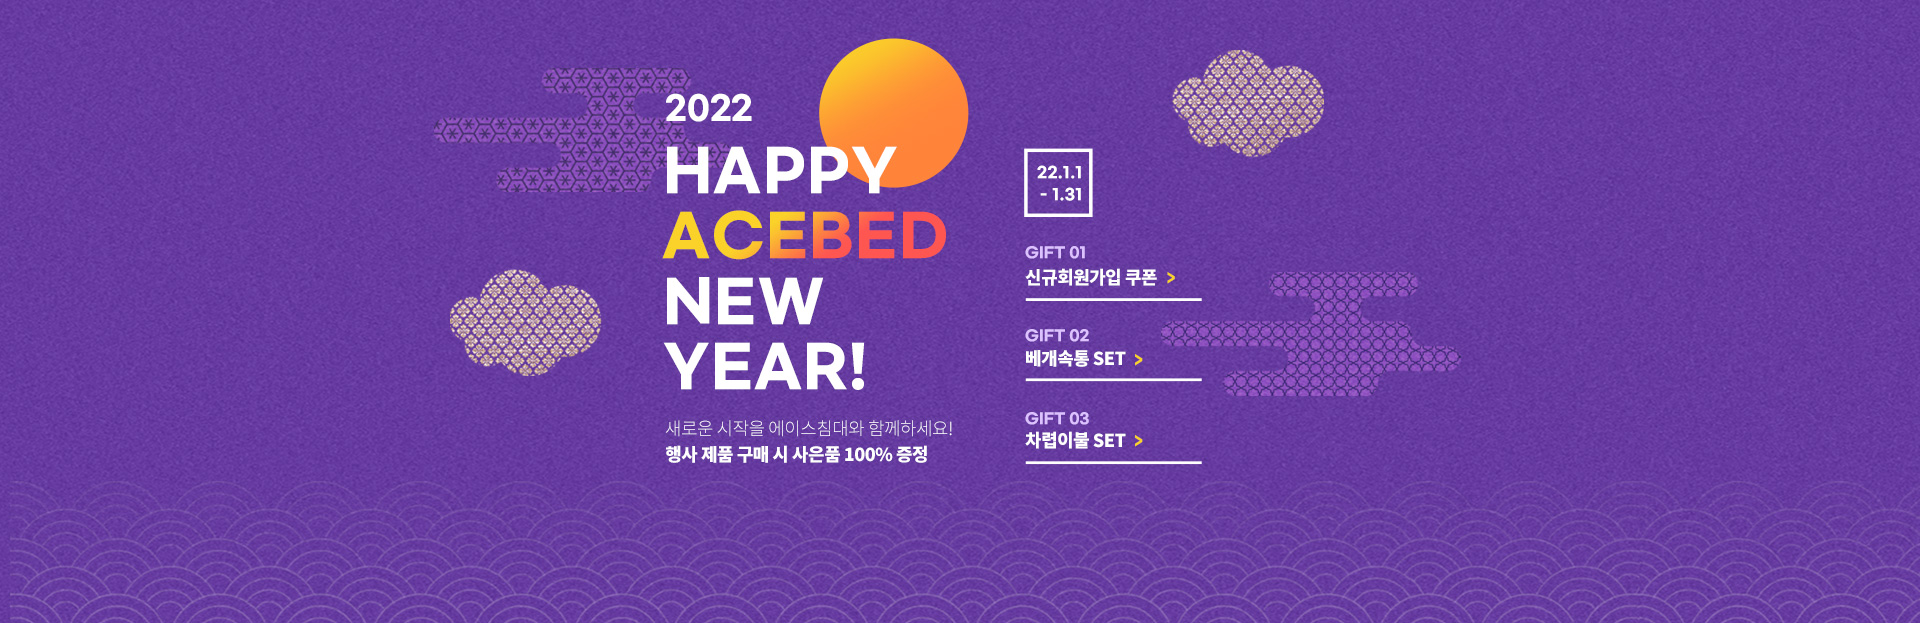 2022 ACEBED NEW YEAR!